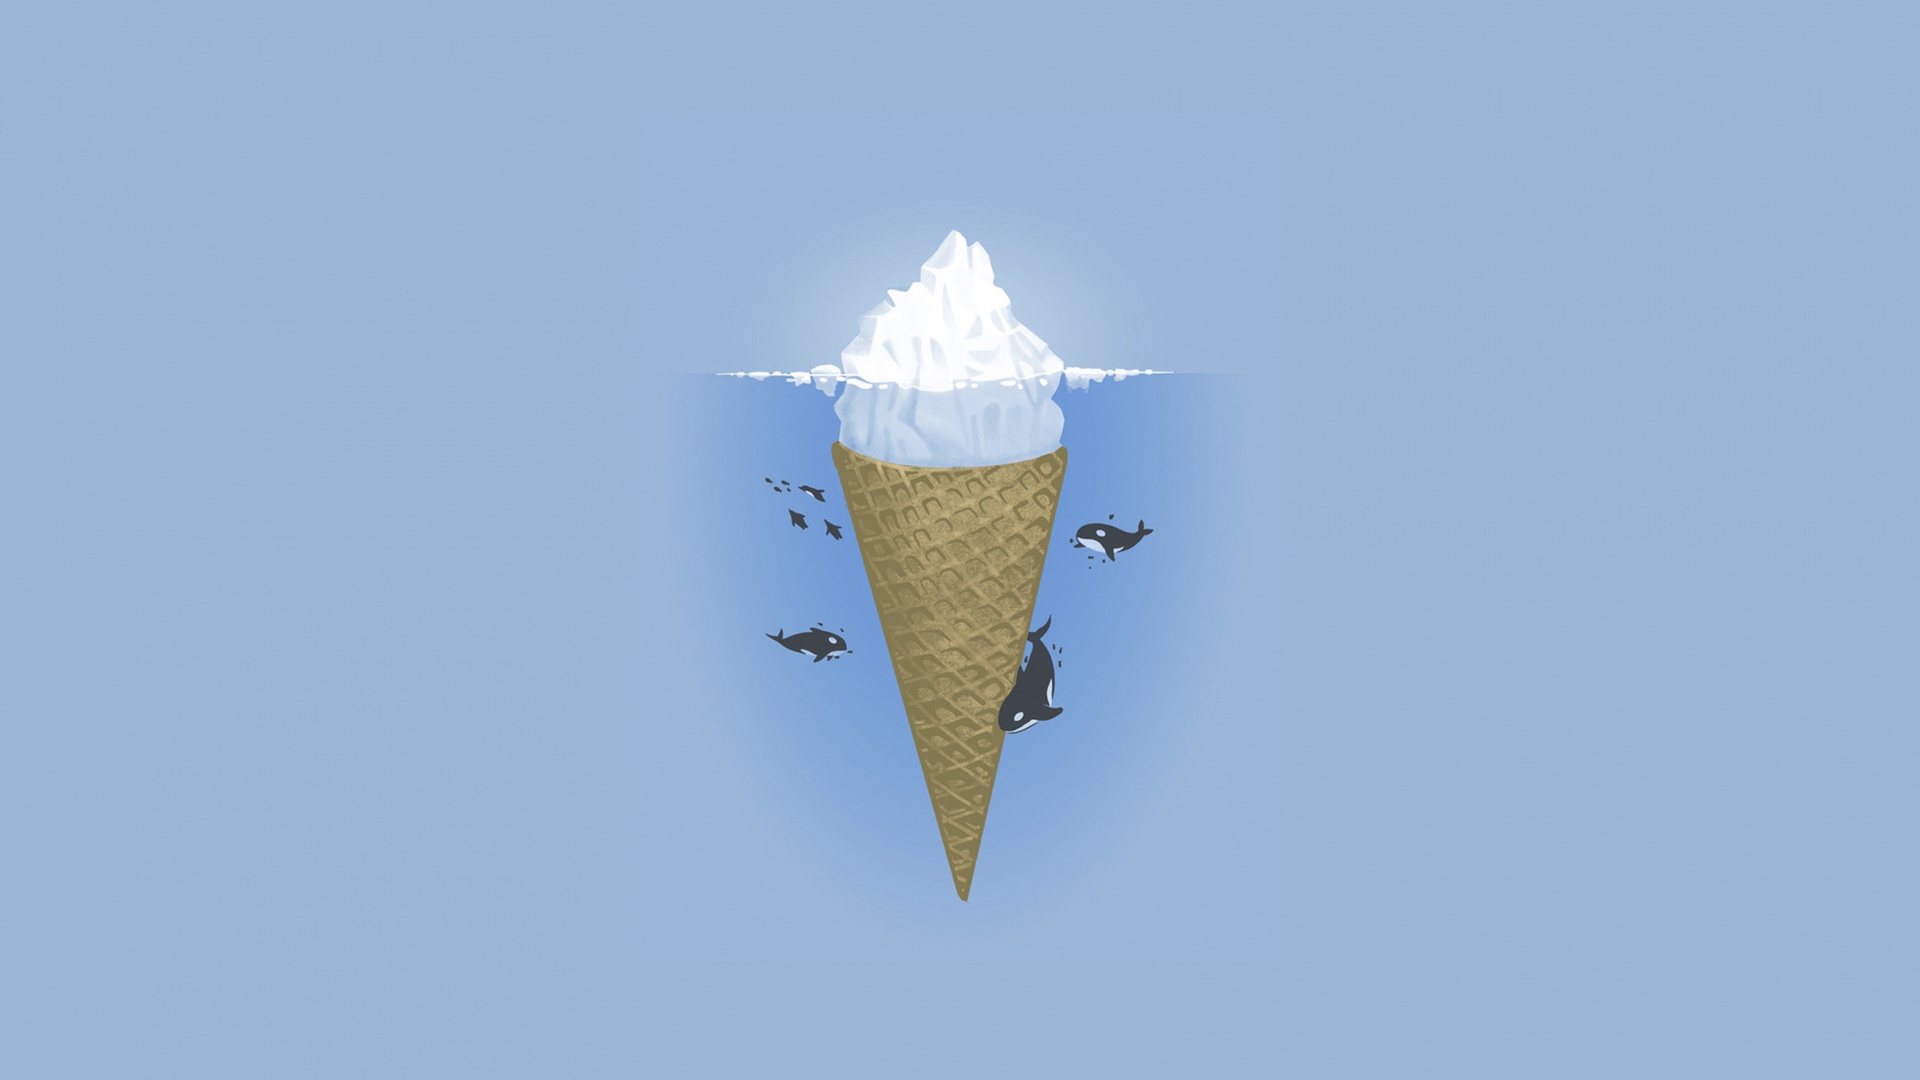 Download Free Cute Ice Cream Wallpapers